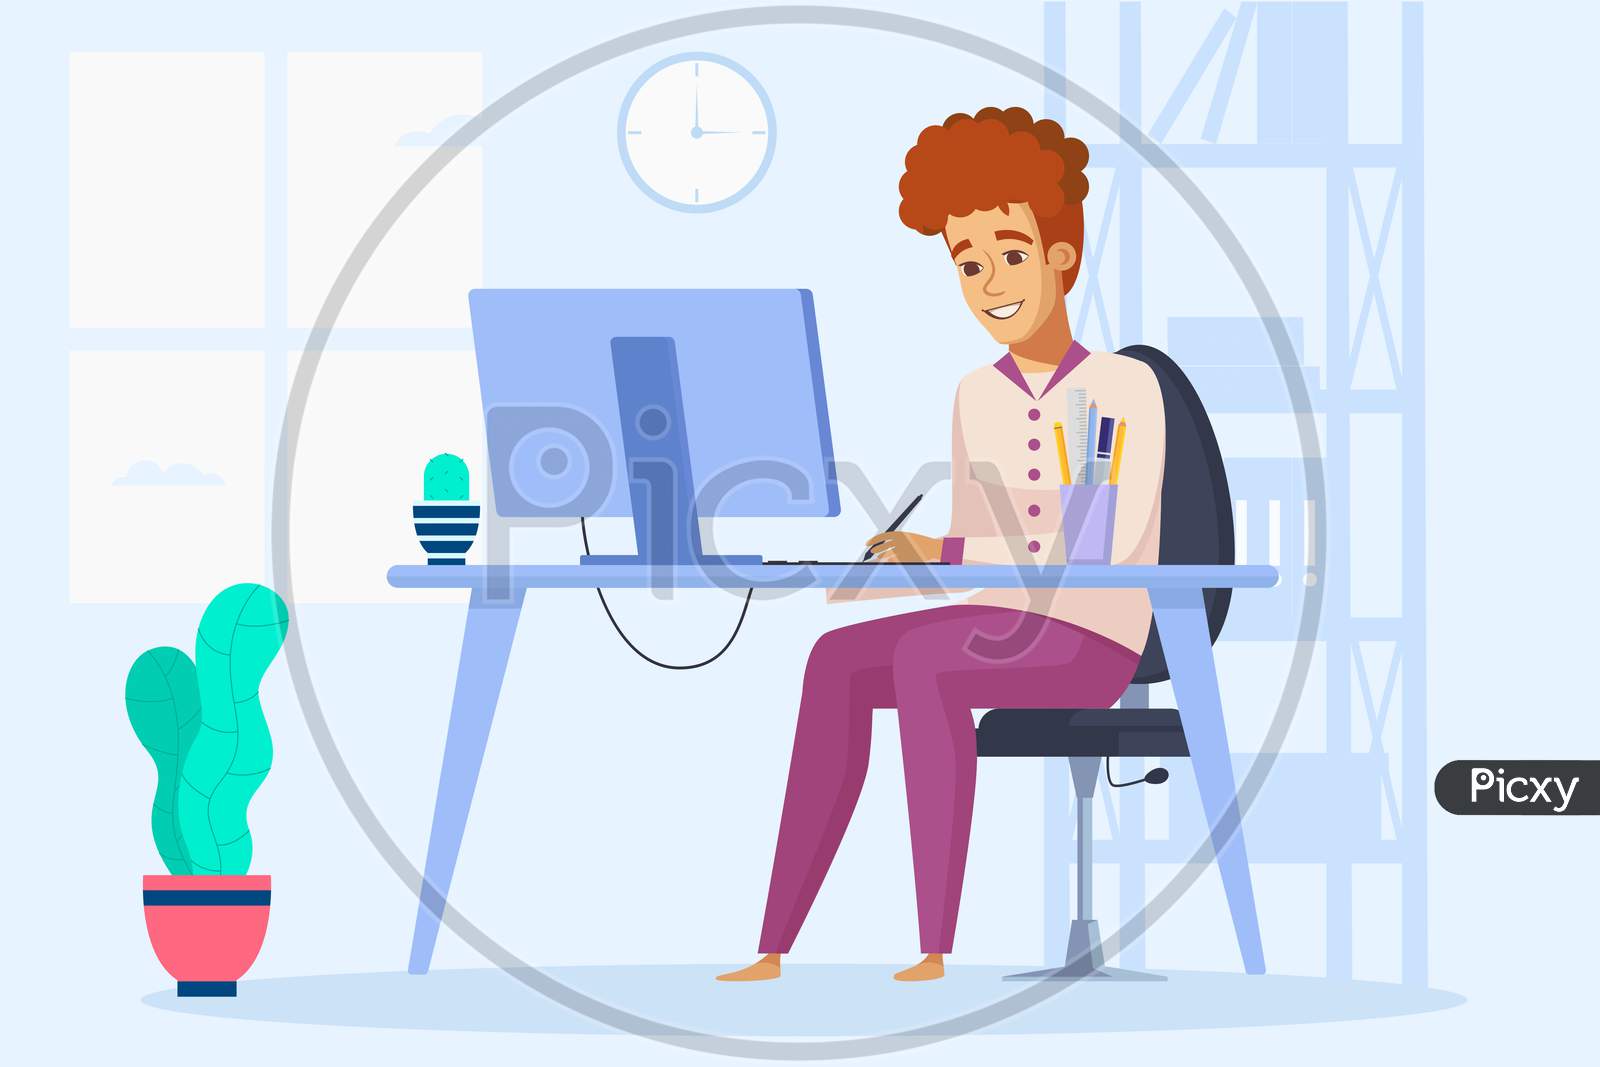 Working From Home, Boy Telecommuting, Mobile Work During Coronavirus Pandemic, Stay At Home Vector Illustration